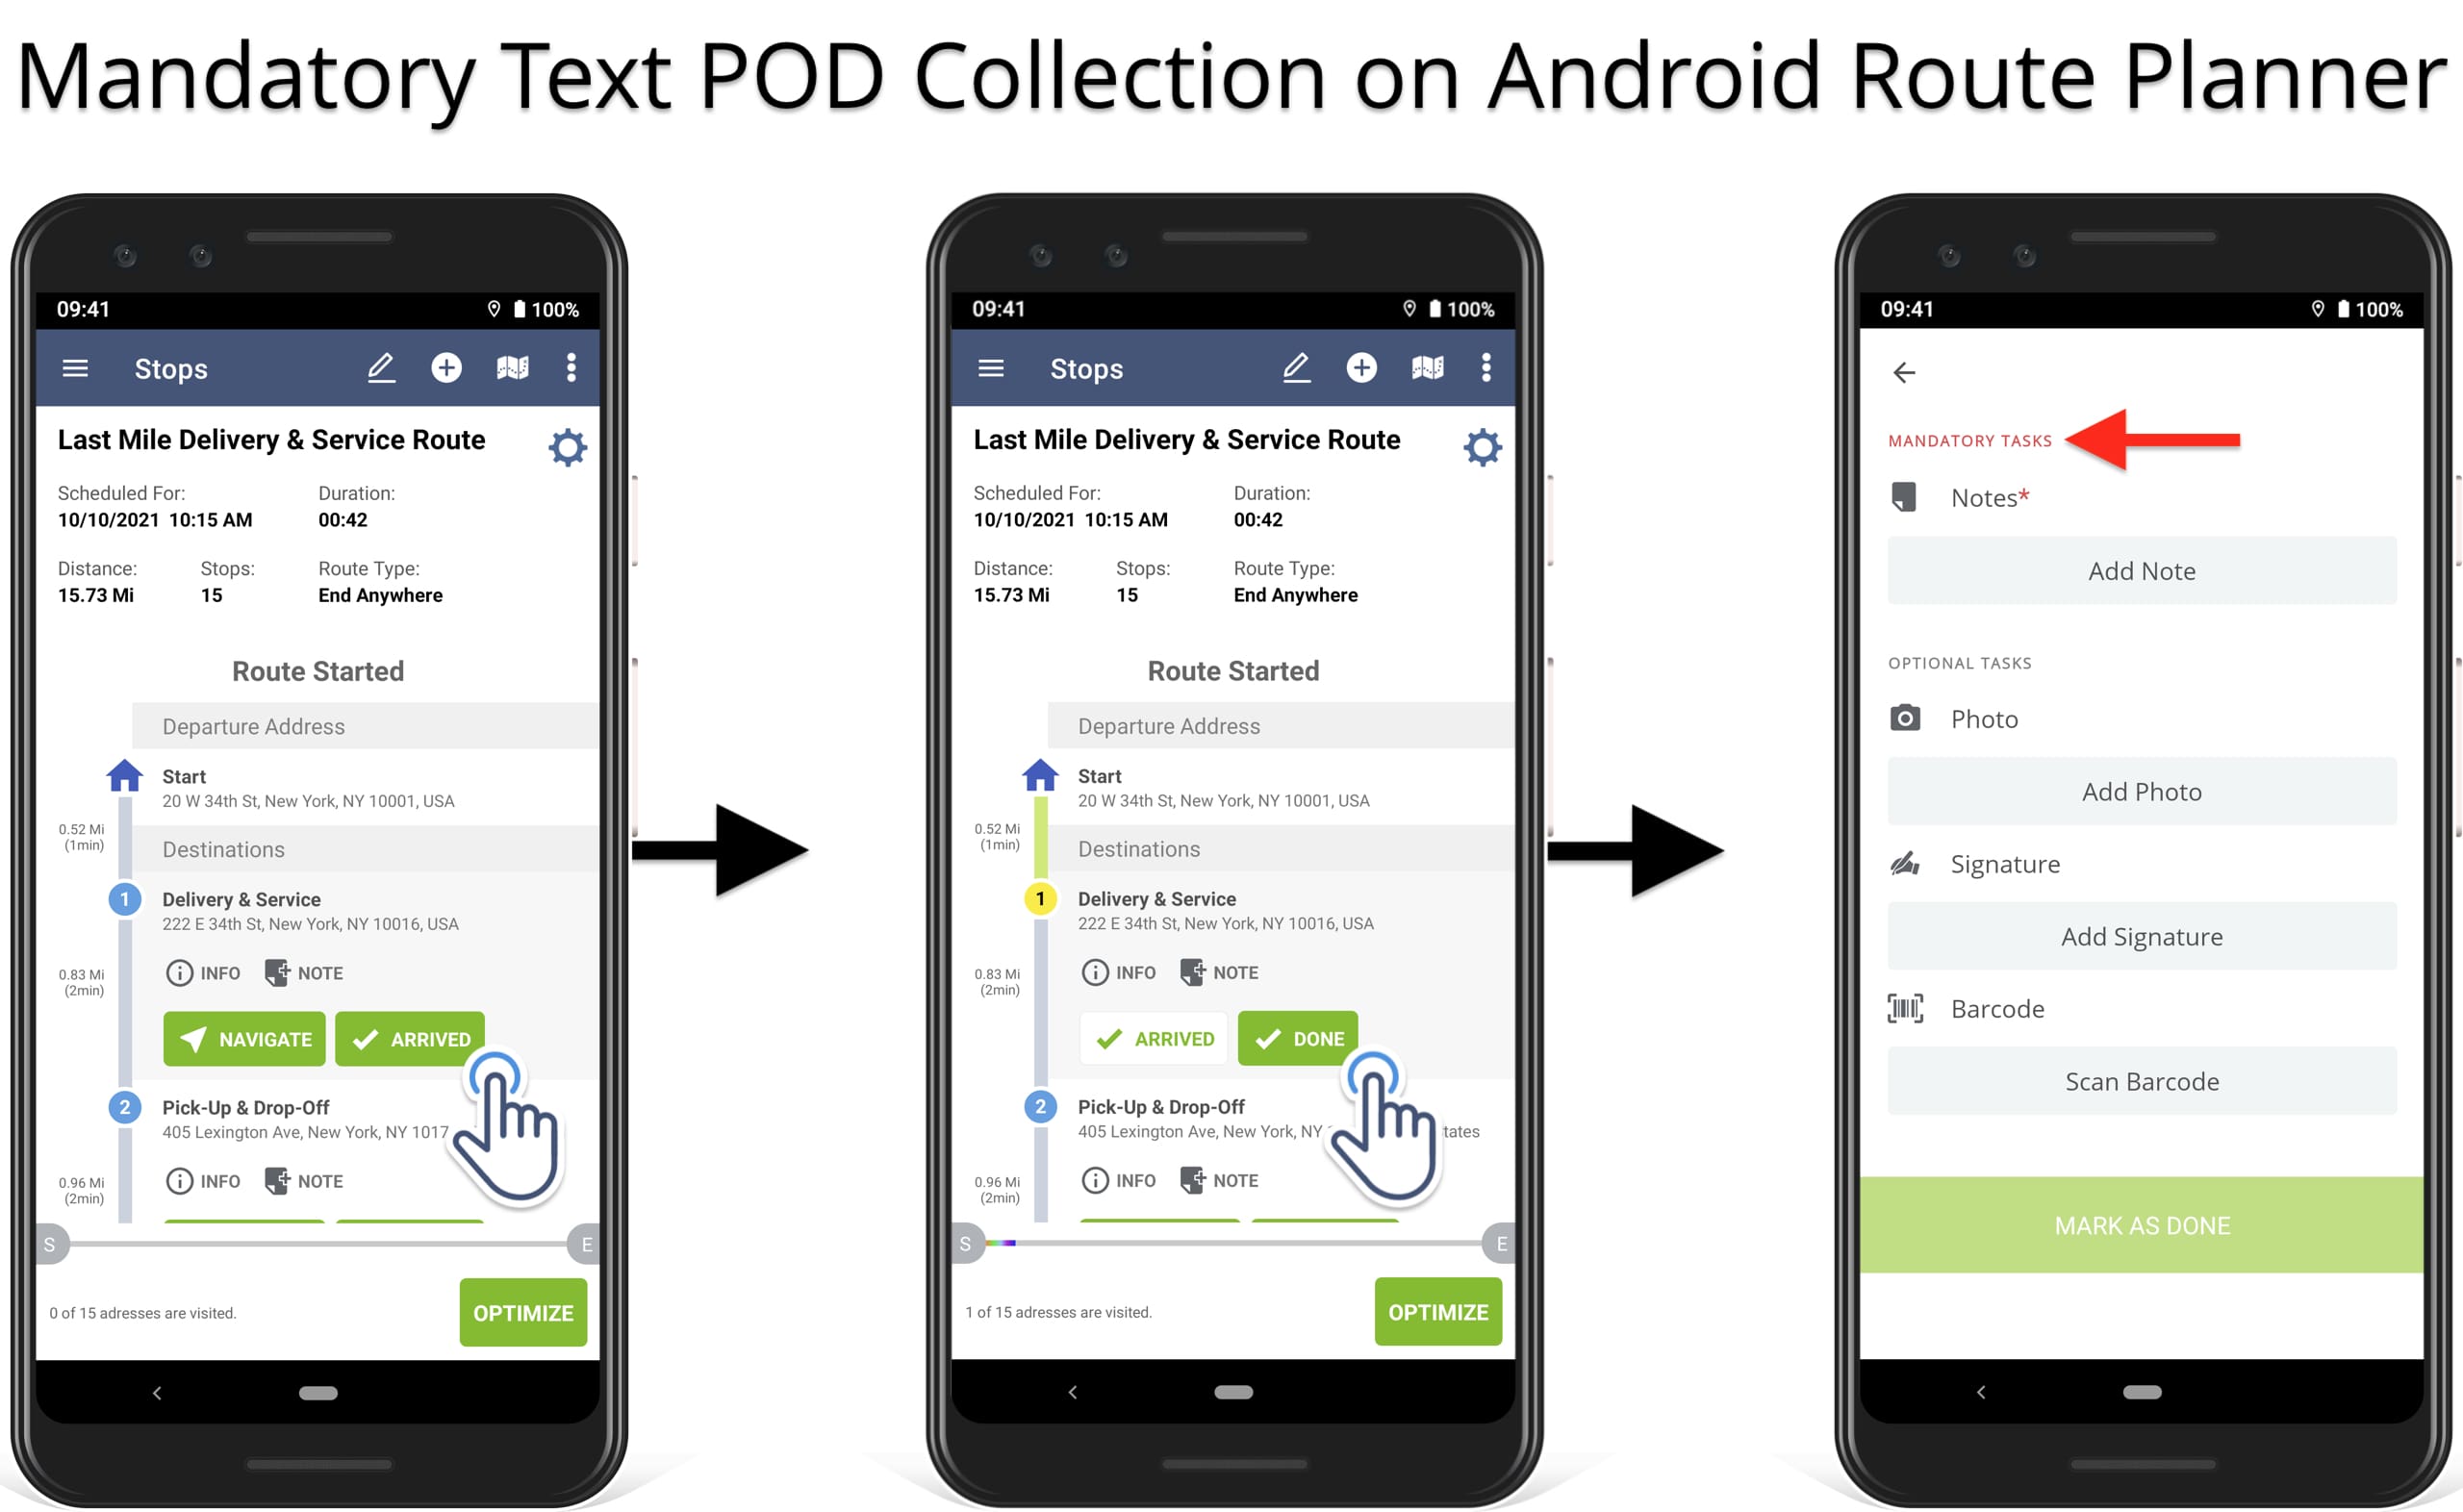 Mandatory route note attachment as POD or proof of service on the Android Route Planner app.